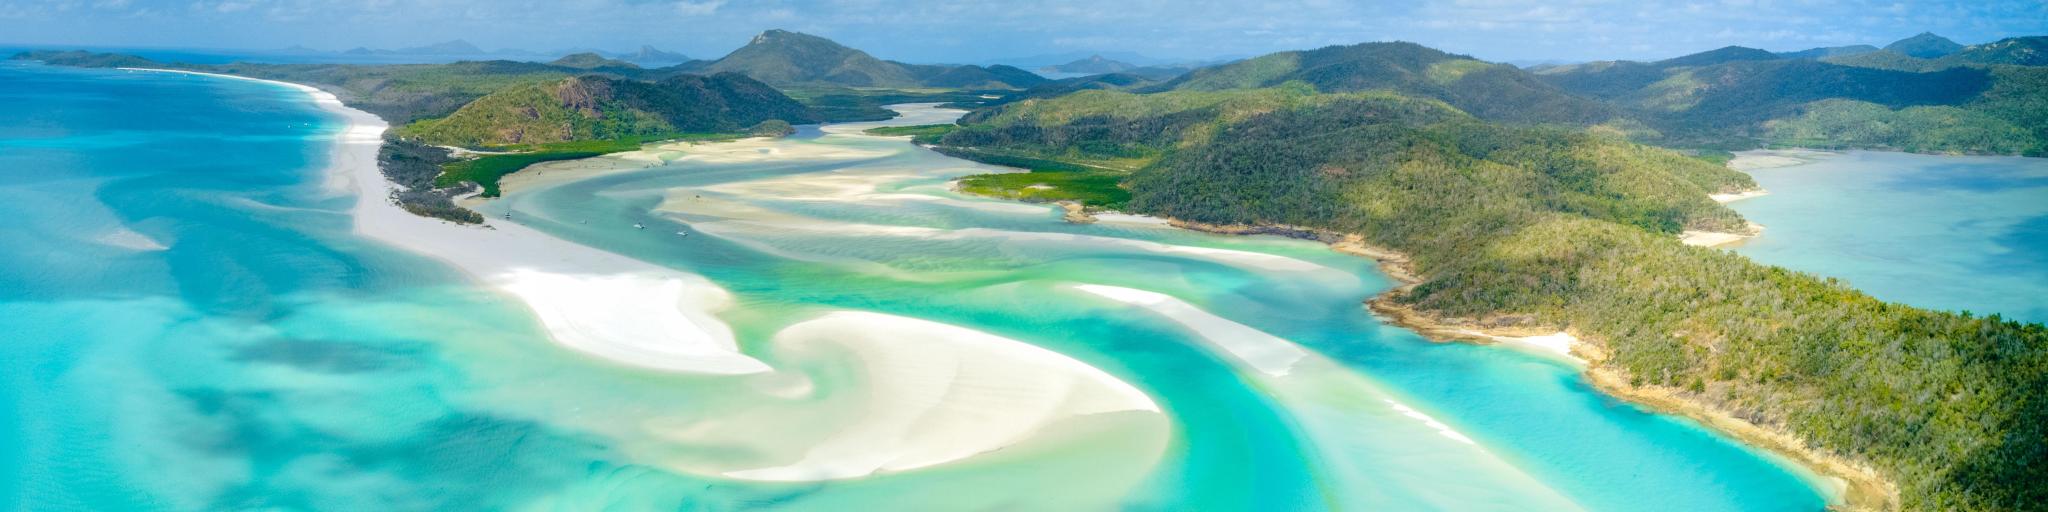 Hill Inlet at Whitehaven Beach, Whitsunday Island, Great Barrier Reef, Queensland, Australia